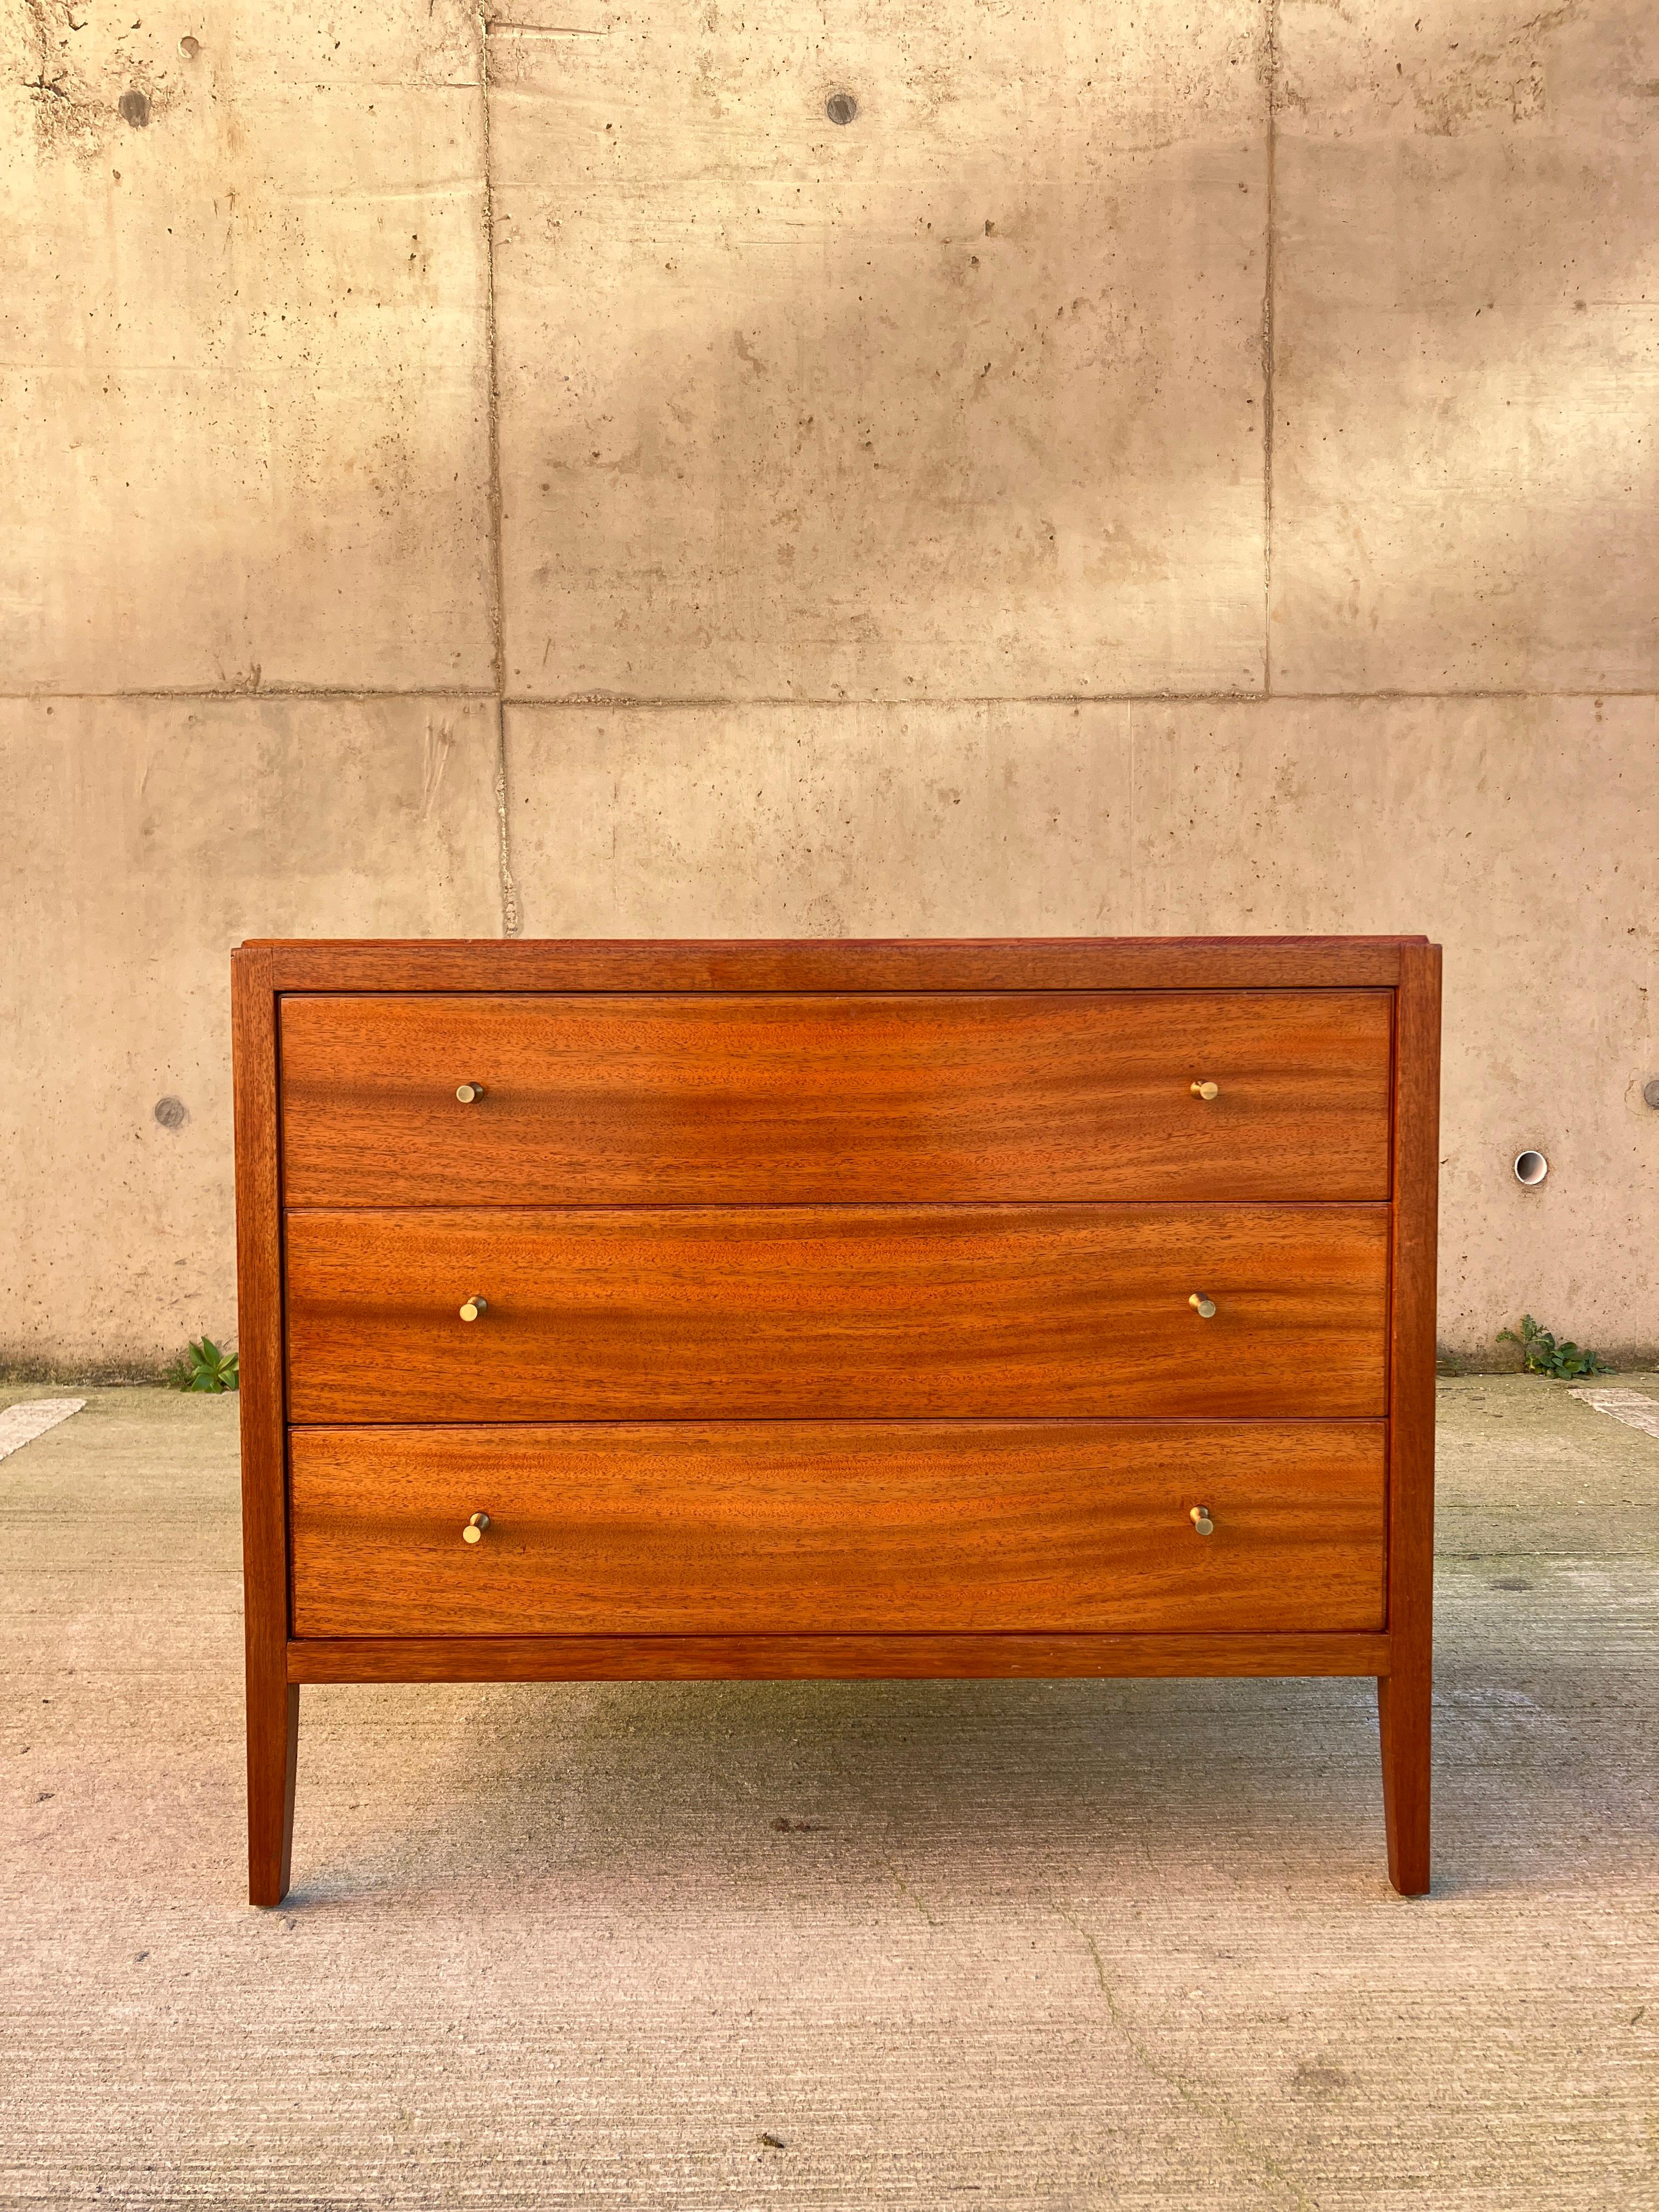 A stunning piece of furniture from the '60s This chest of drawers was made by Loughborough Furniture to be sold in the Heals furniture store in London. Heals was famous for its range of high-quality furniture pieces.  The craftsmanship of these